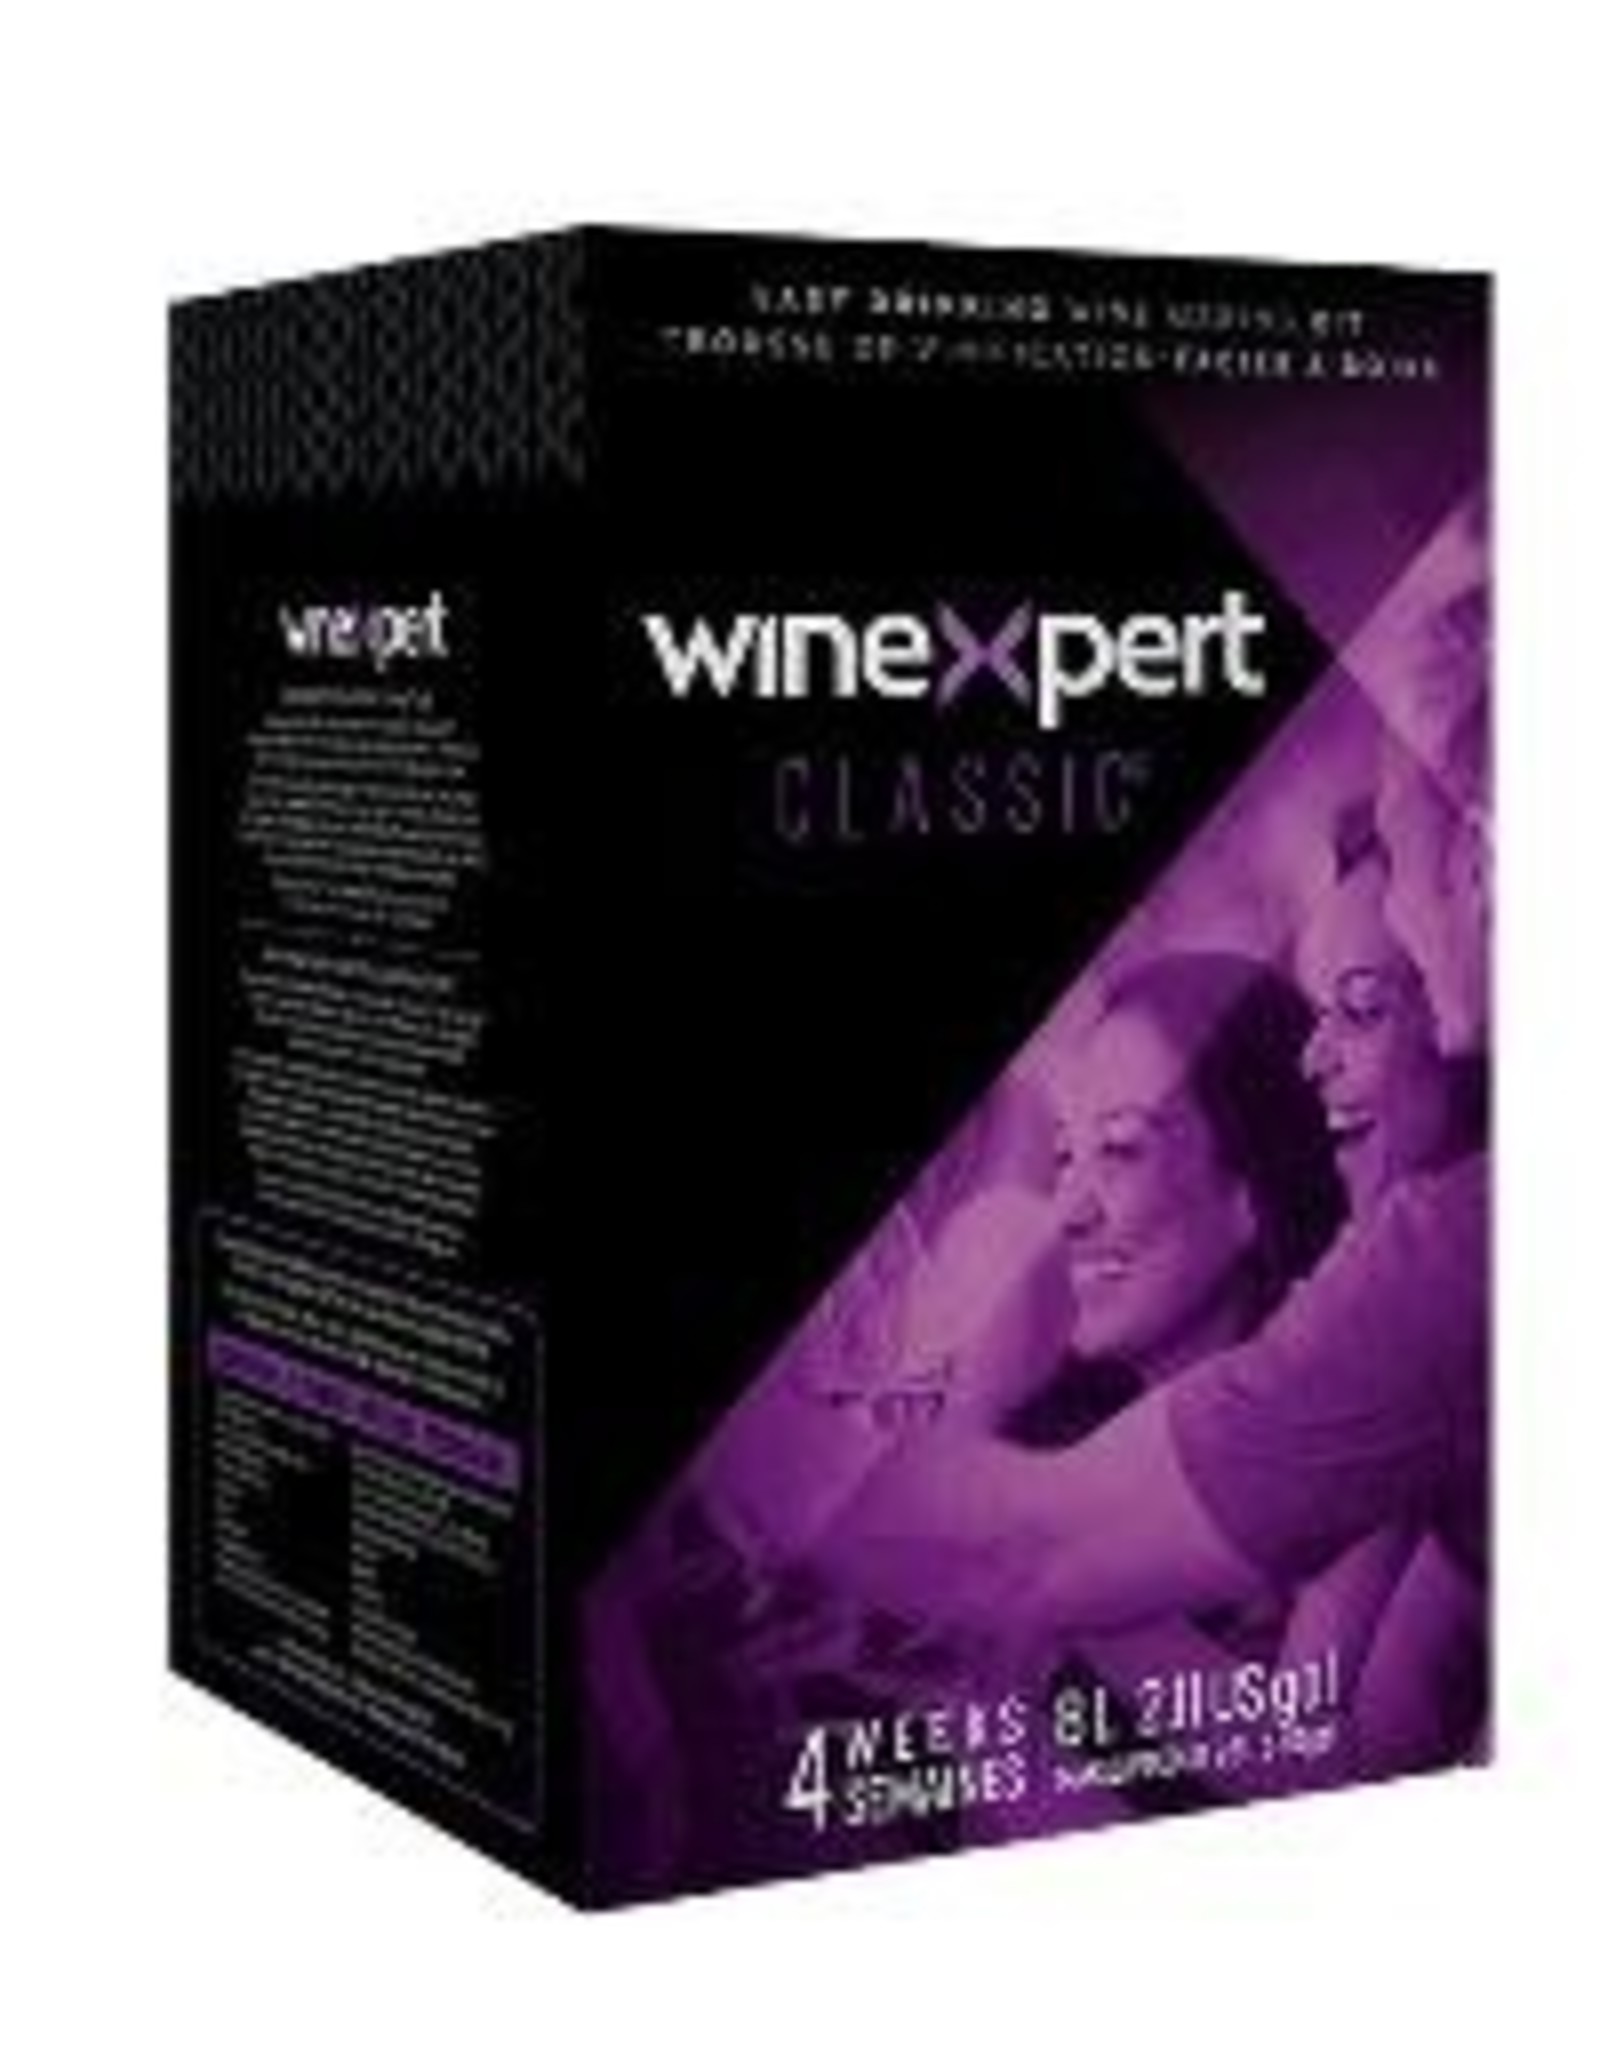 CALIFORNIA LIEBFRAUMILCH STYLE  CLASSIC 8L WINE KIT